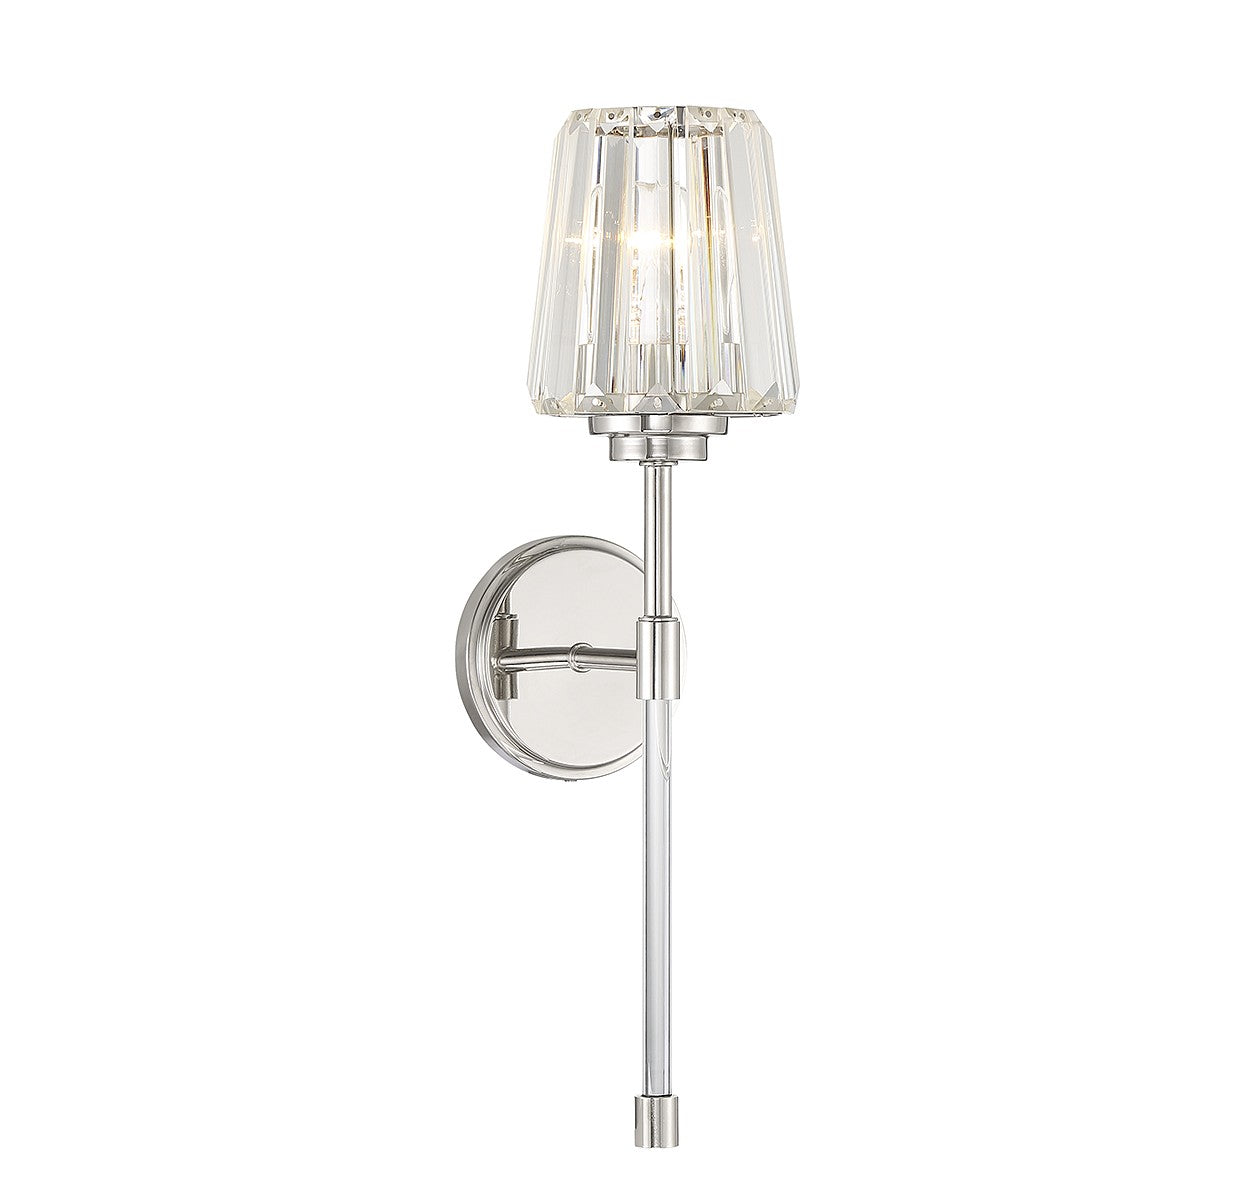 Garnet One Light Wall Sconce in Polished Nickel